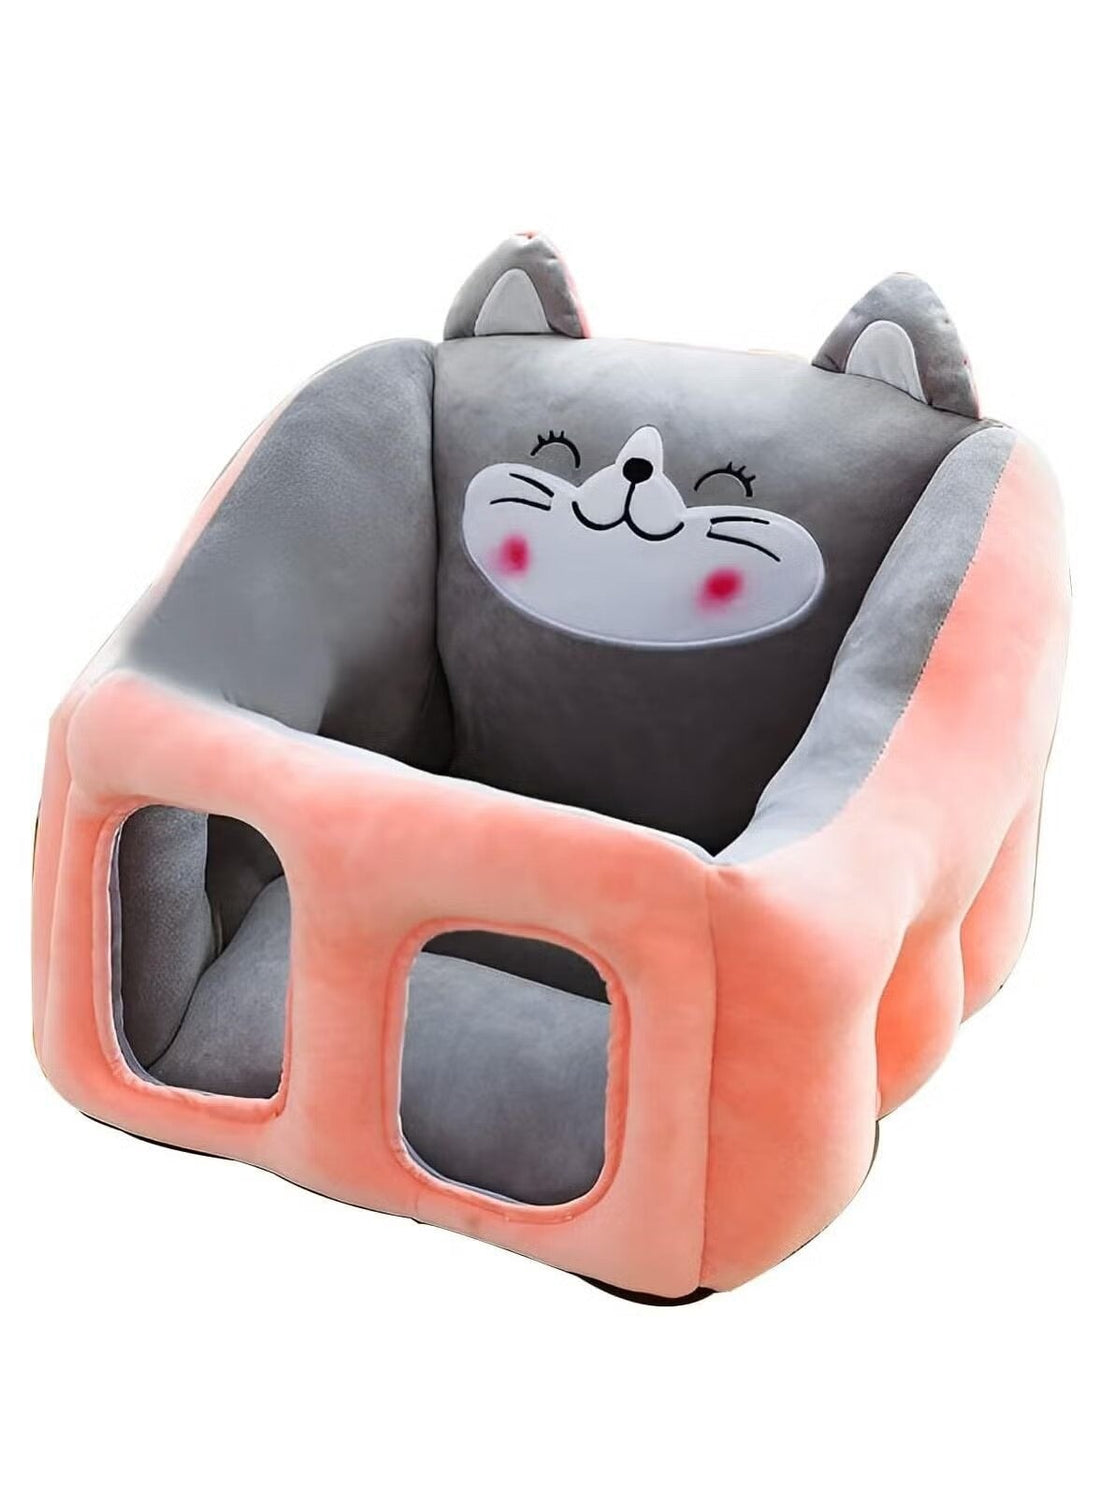 Kids Sofa Support Chair Soft Plush Cartoon Animal Baby Learning to Sit On Cushions Comfortable Plush Seats